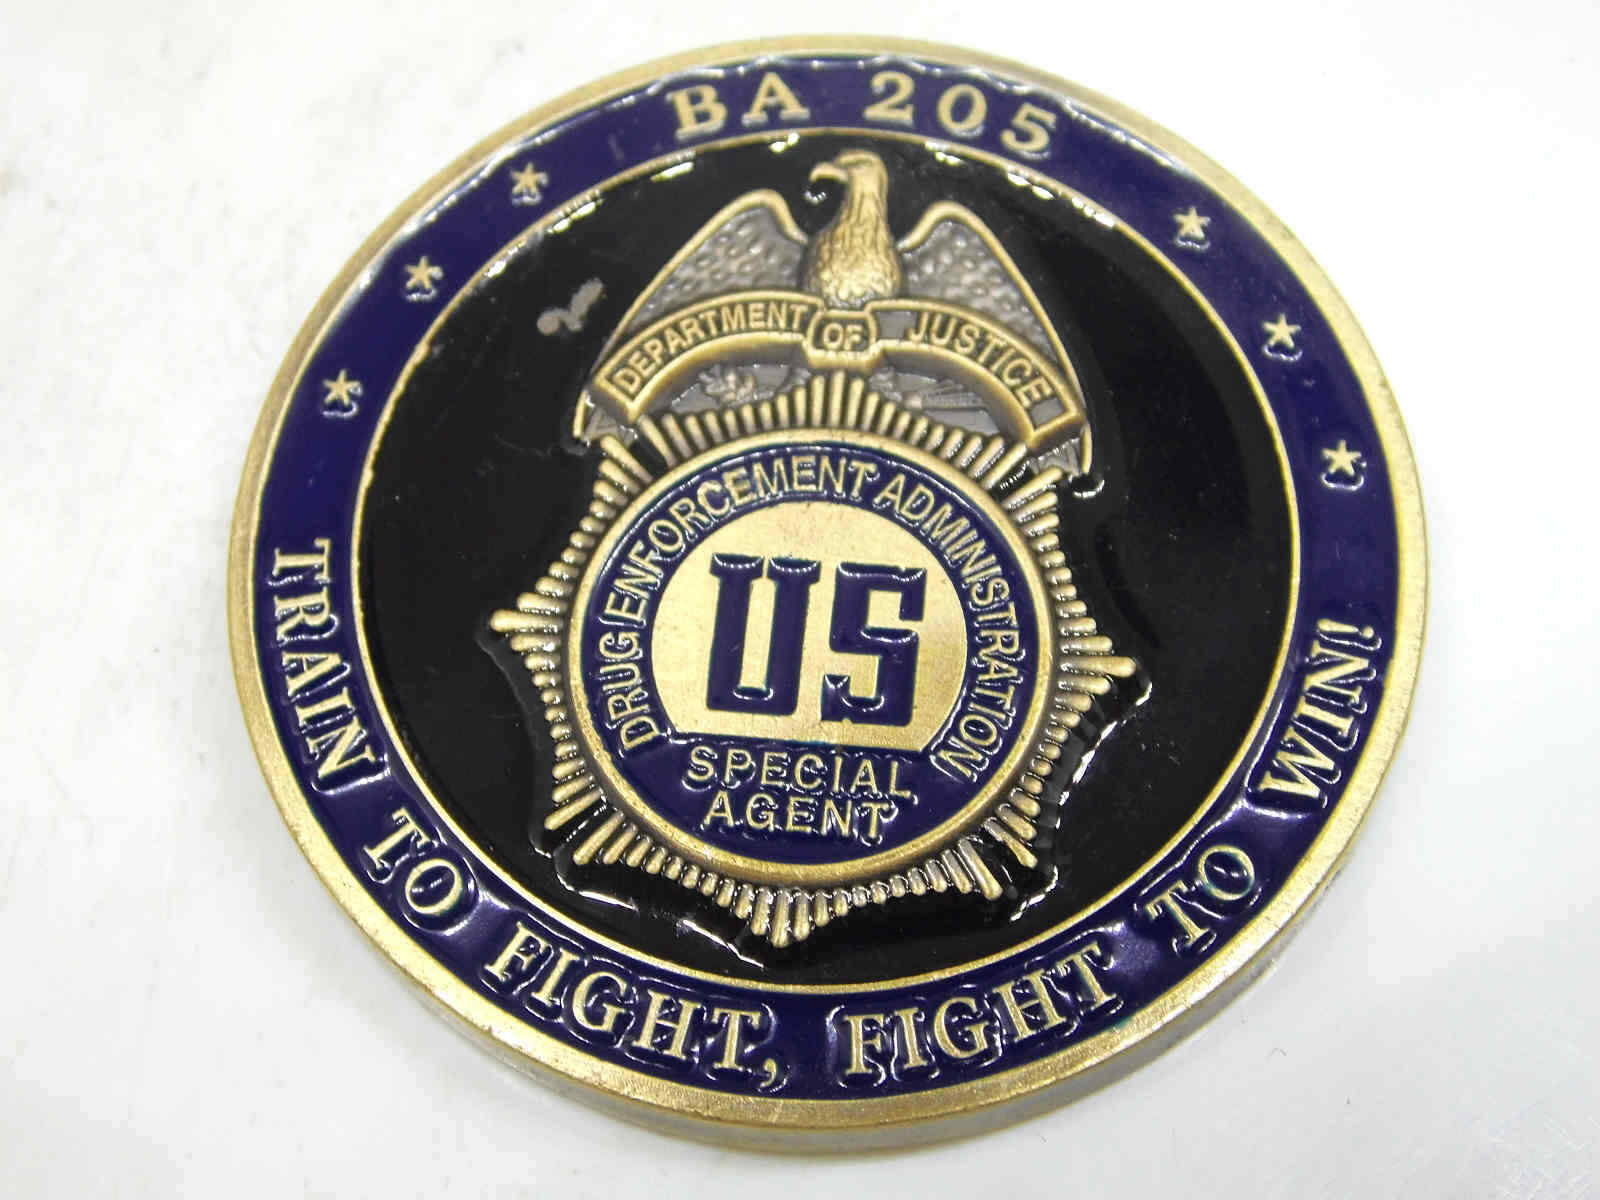 US SPECIAL AGENT DRUGENFORCEMENT ADMINISTRATION BA 205 CHALLENGE COIN